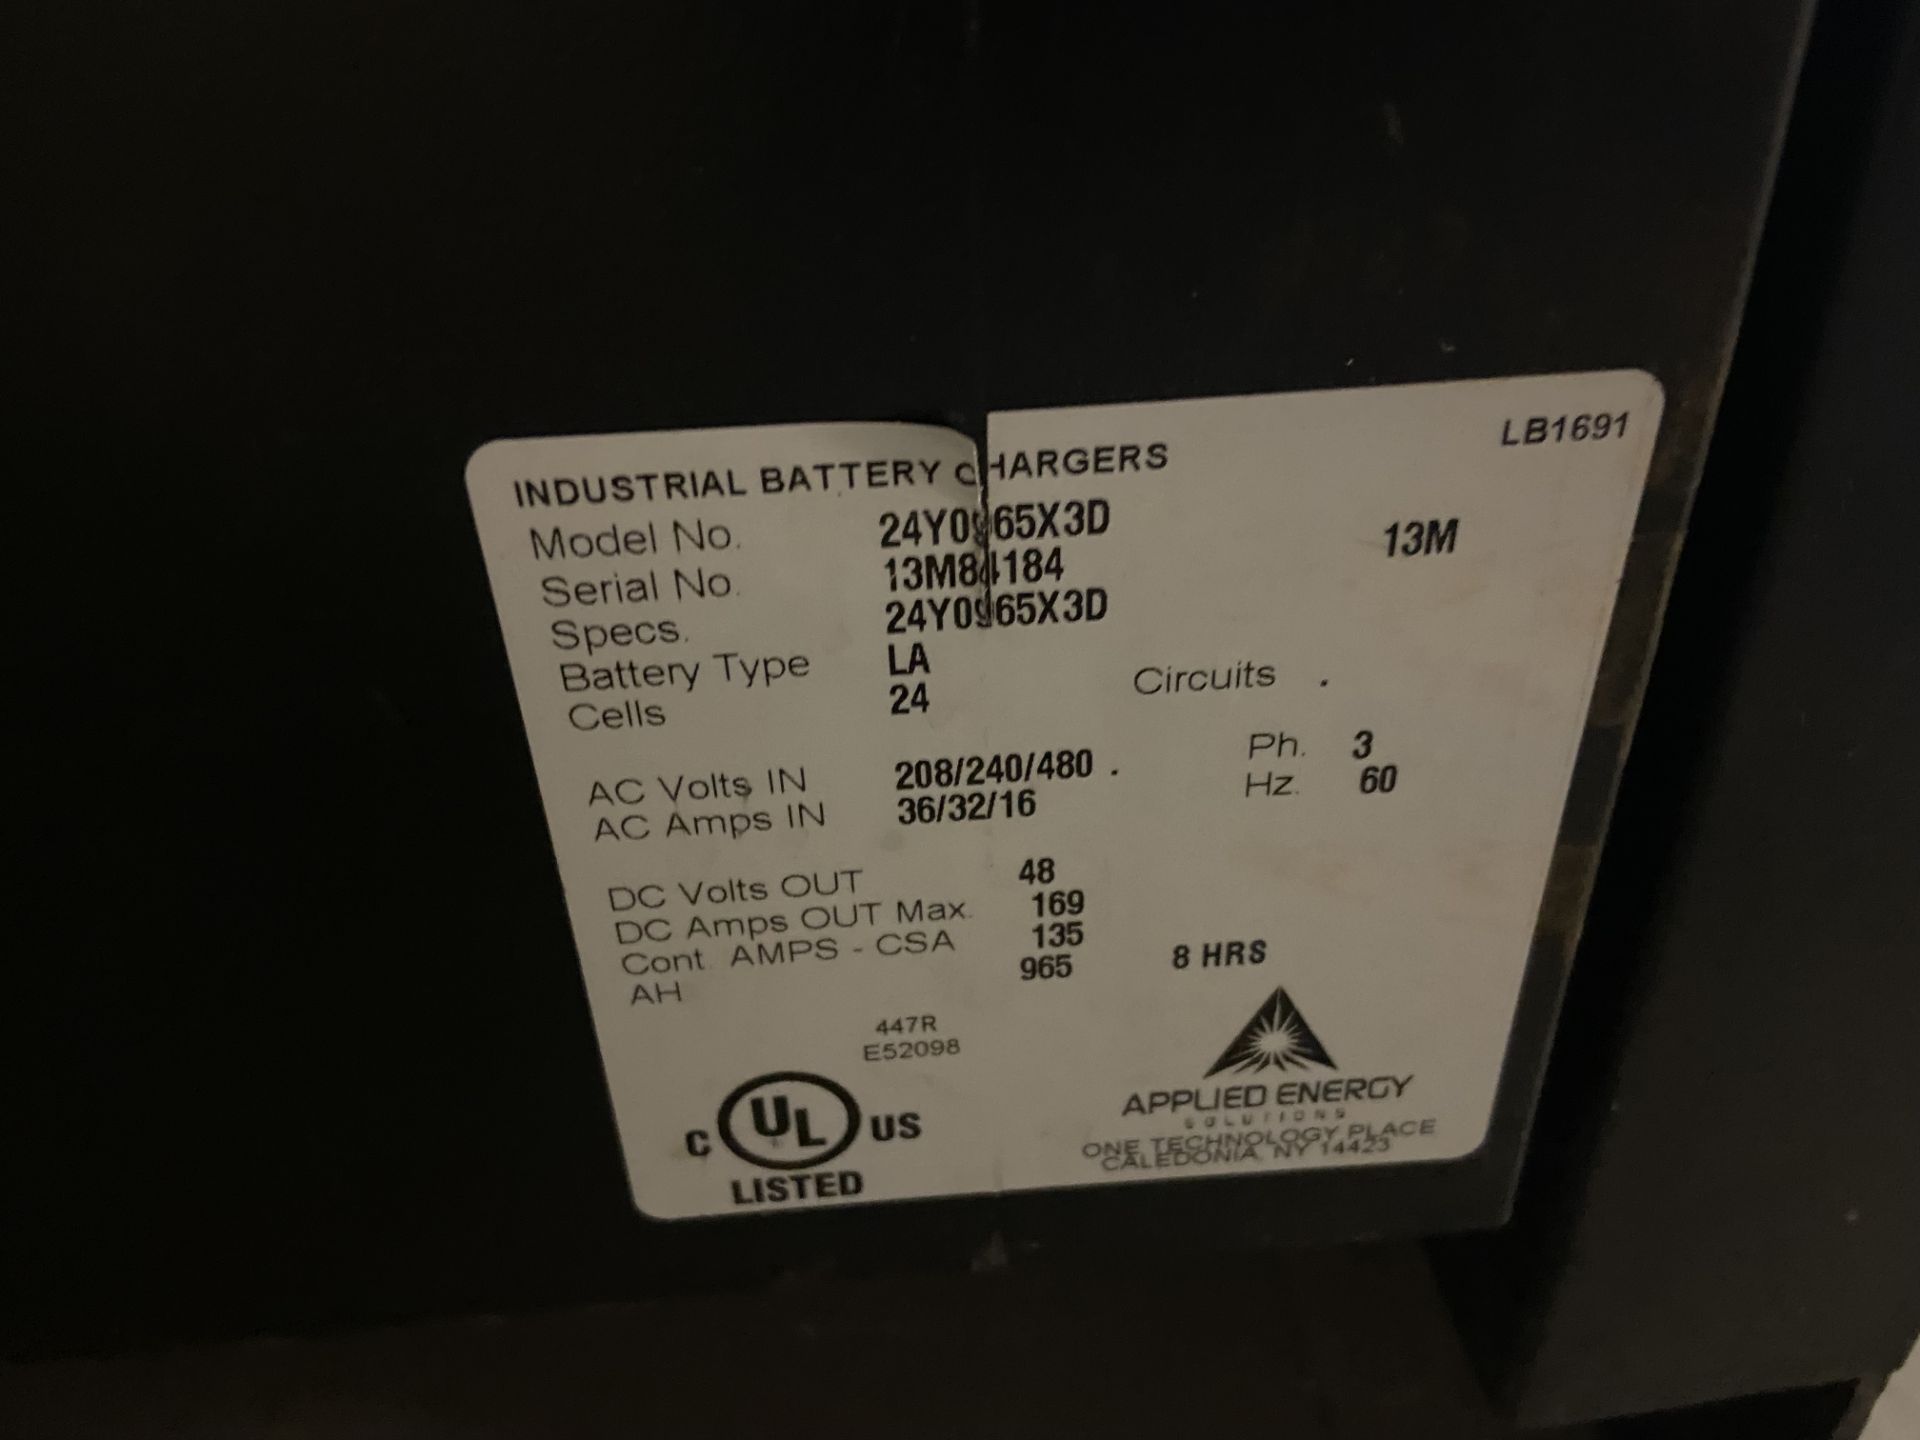 Work Horse Series 3 Battery Charger, Model# 24Y0965X3D, Serial# 13M84184 - Image 3 of 4